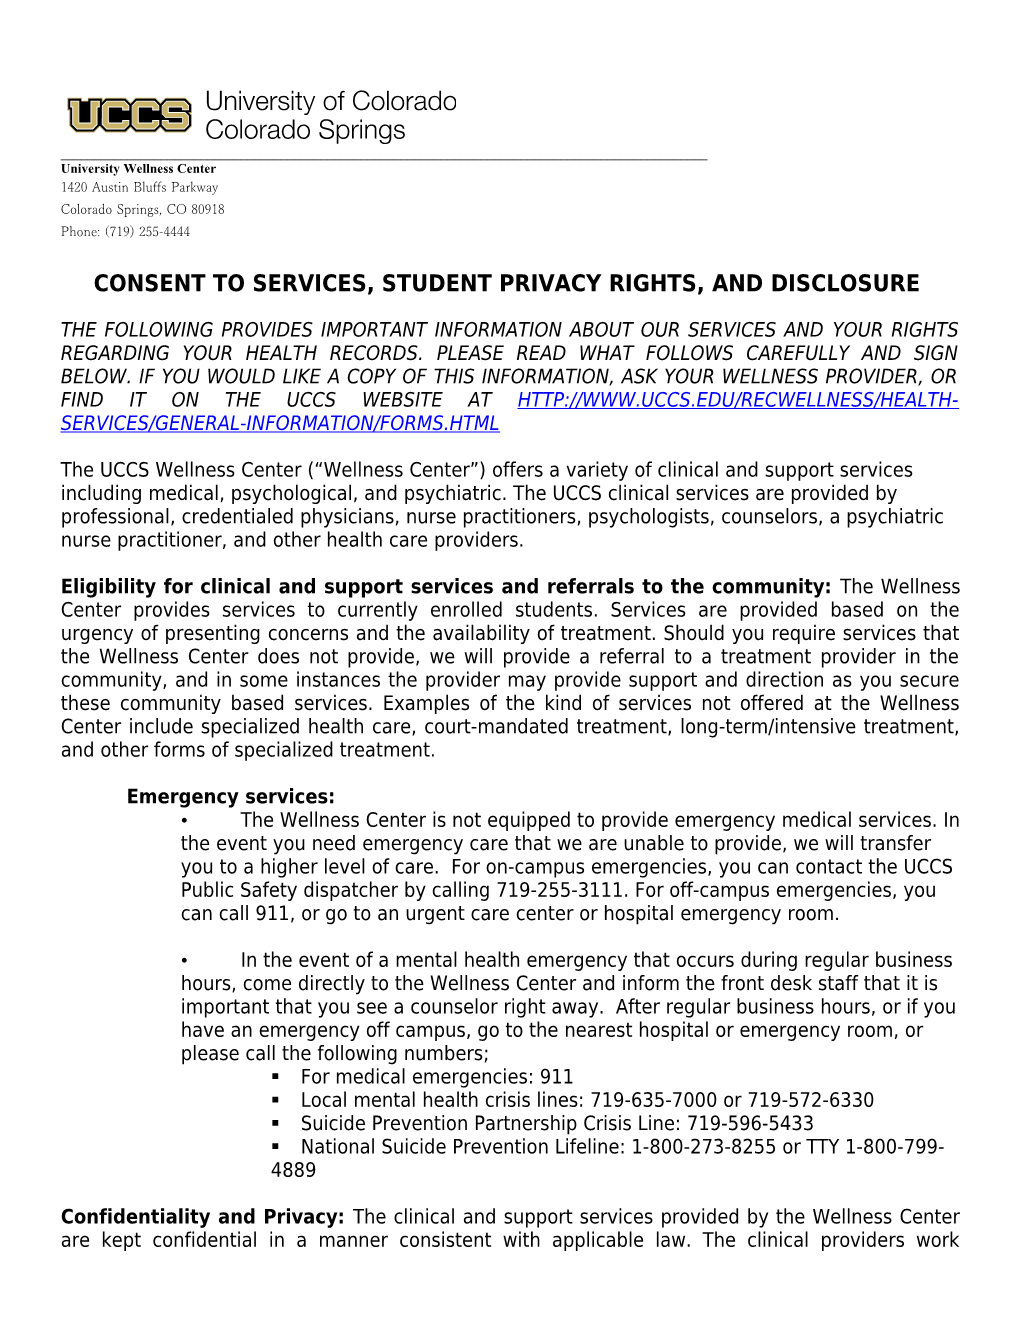 Consent to Services,Student Privacy Rights, and Disclosure